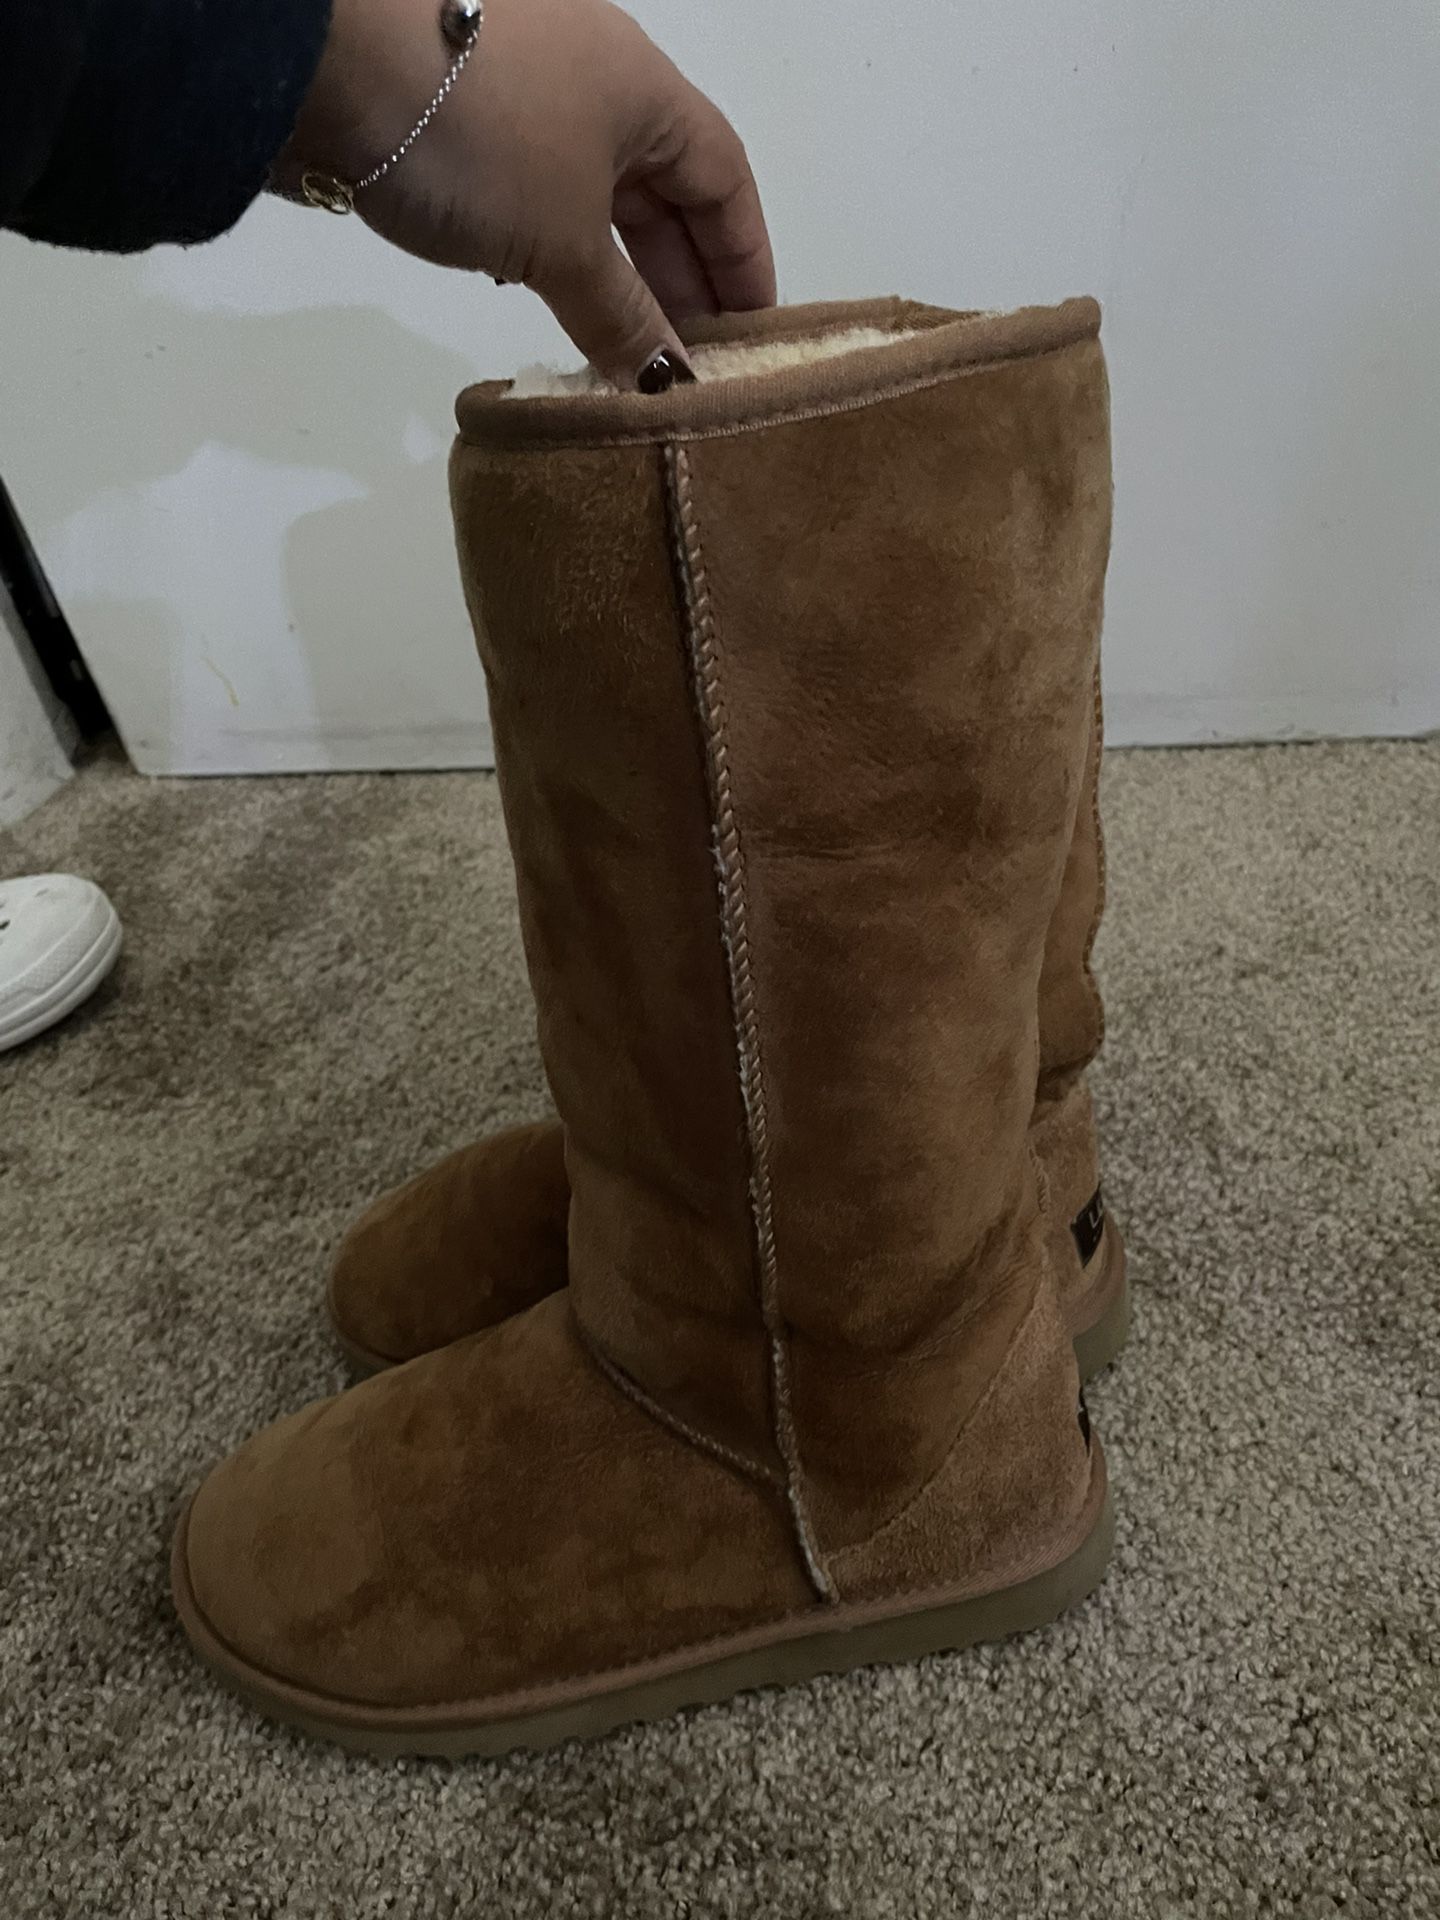 Used Chestnut Ugg Boots